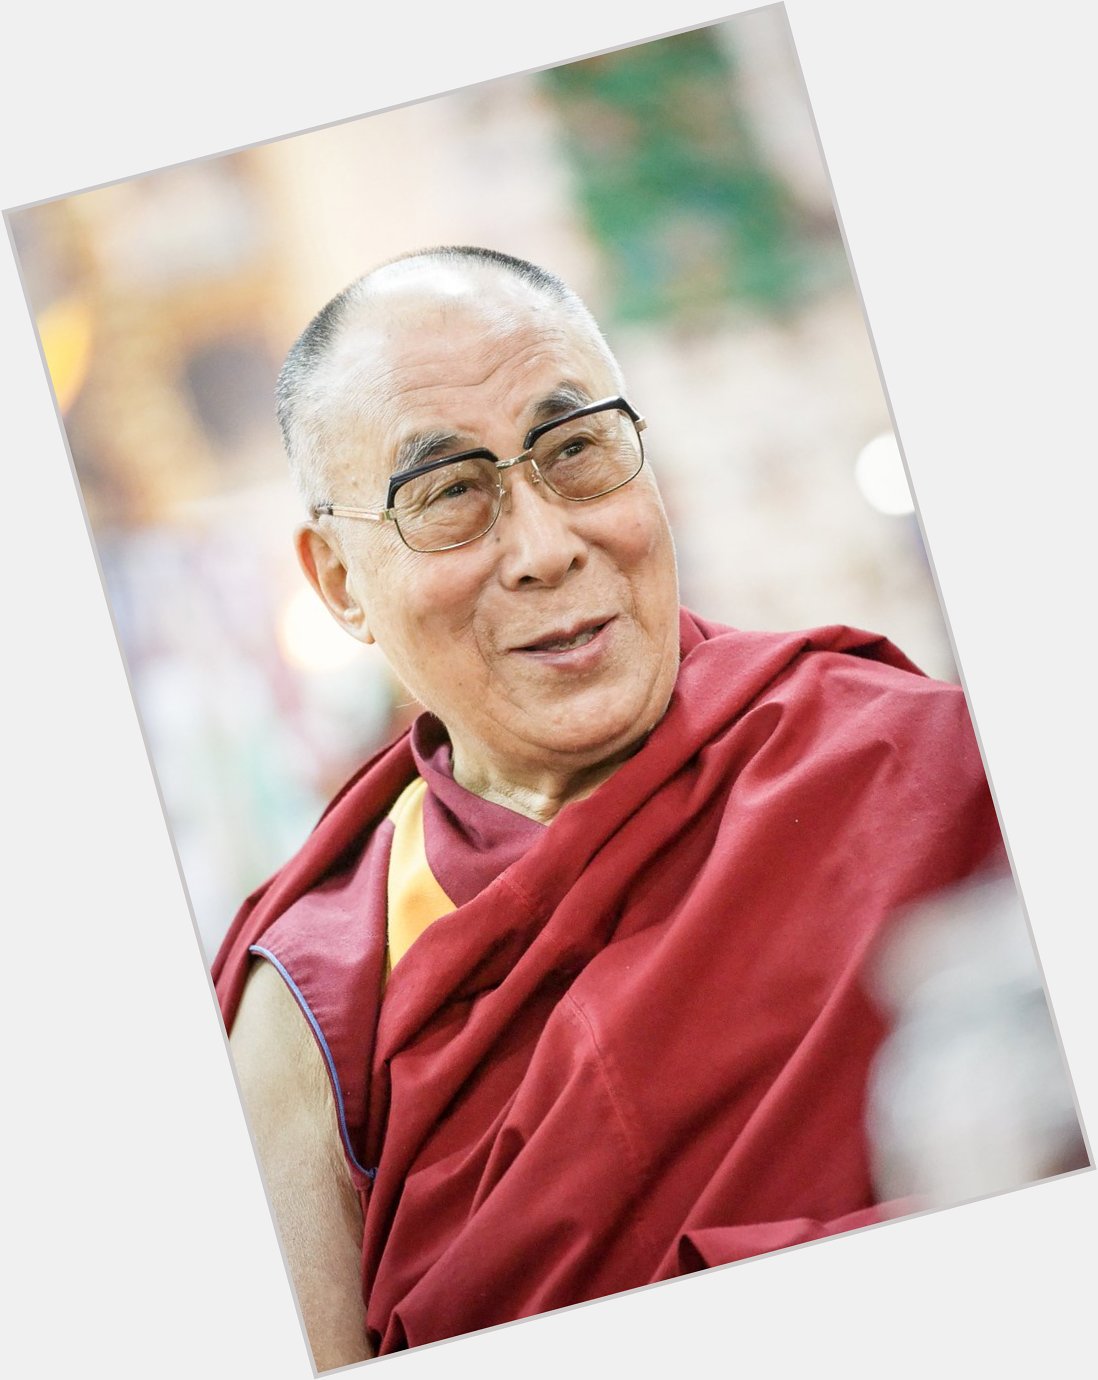 Happy 82nd birthday to our co-founder, Tenzin Gyatso, His Holiness the 14th Dalai Lama  